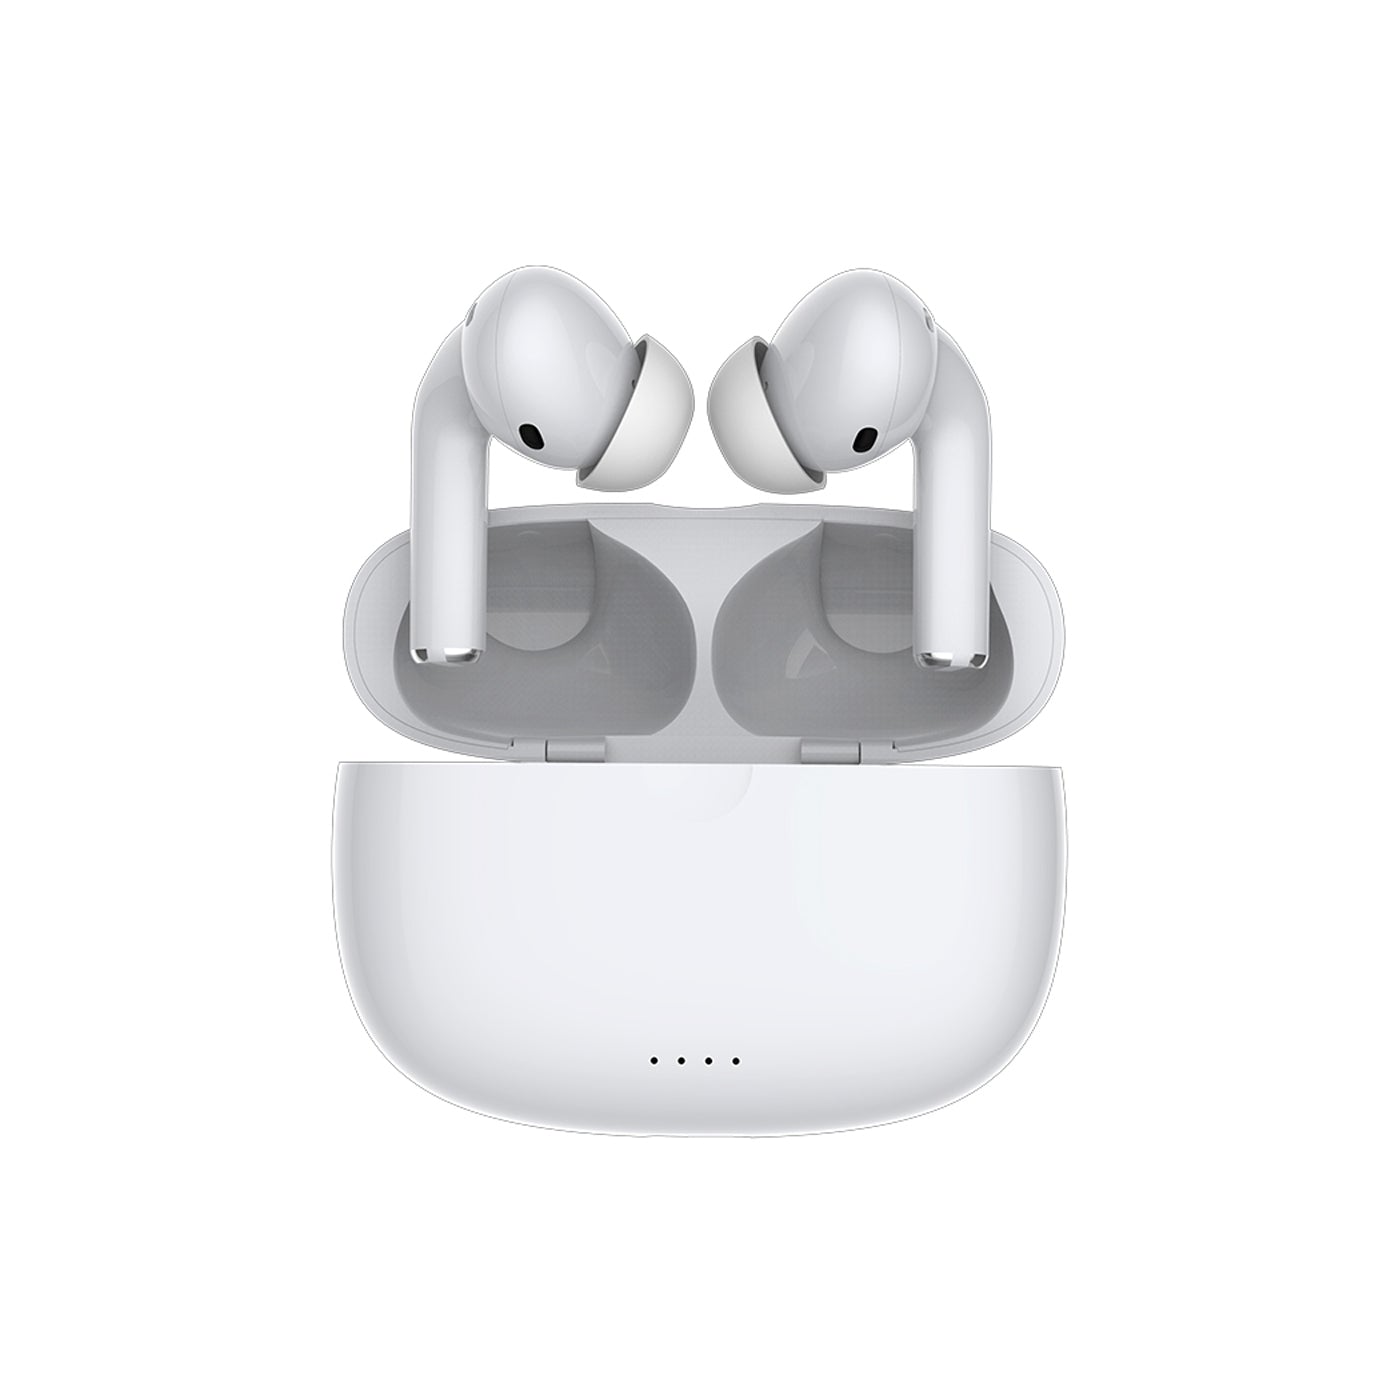 Get Simply Speak GSS-WHT Simply Speak Translation Earbuds Powered By IBM Watson, White